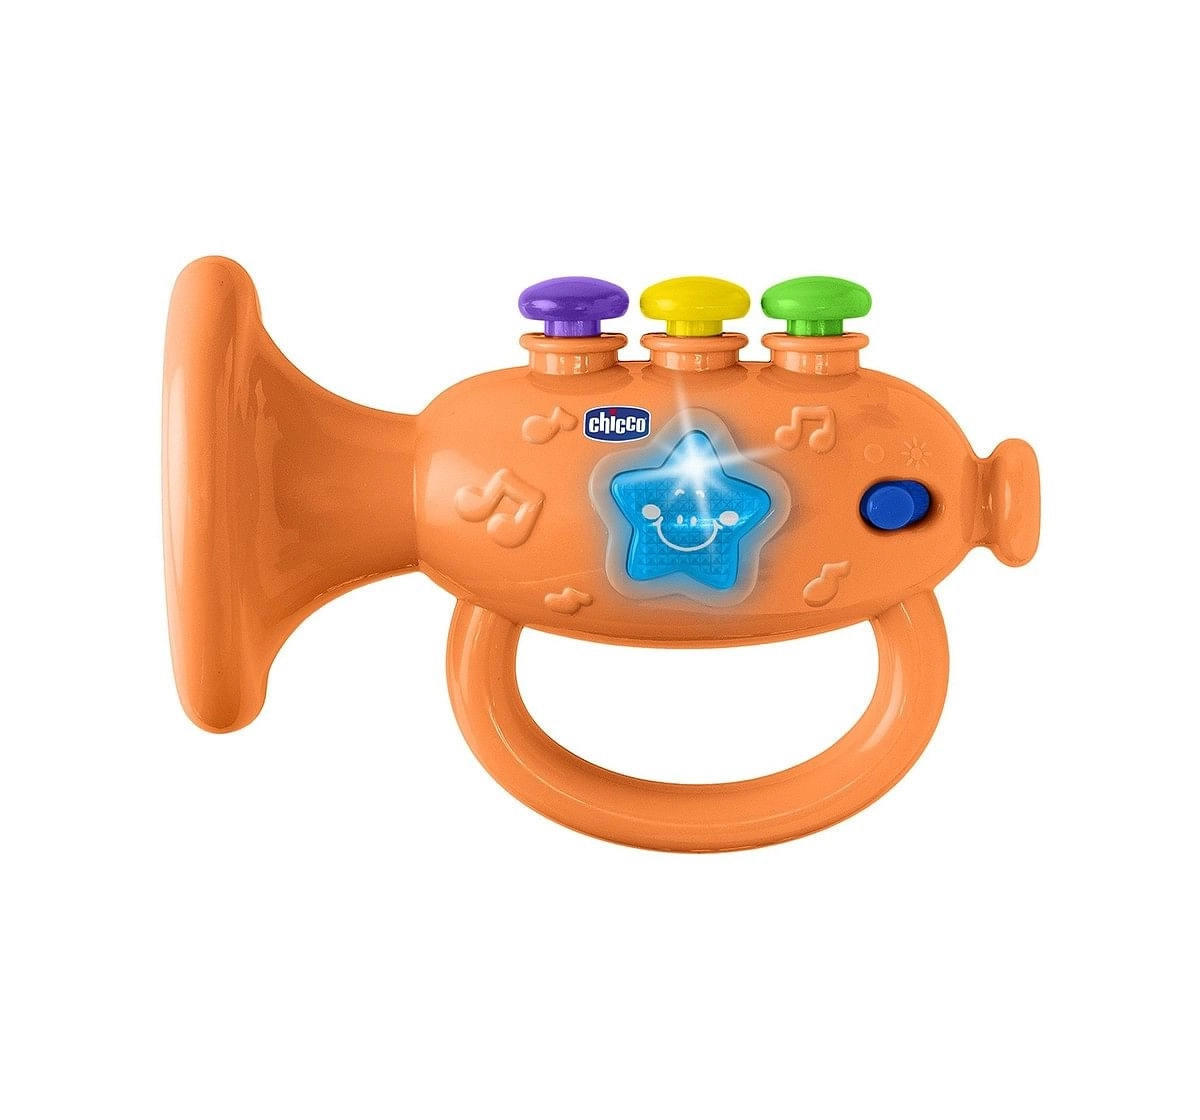 Chicco Musical Trumpet Activity Toy with Light for Kids age 3M+ 